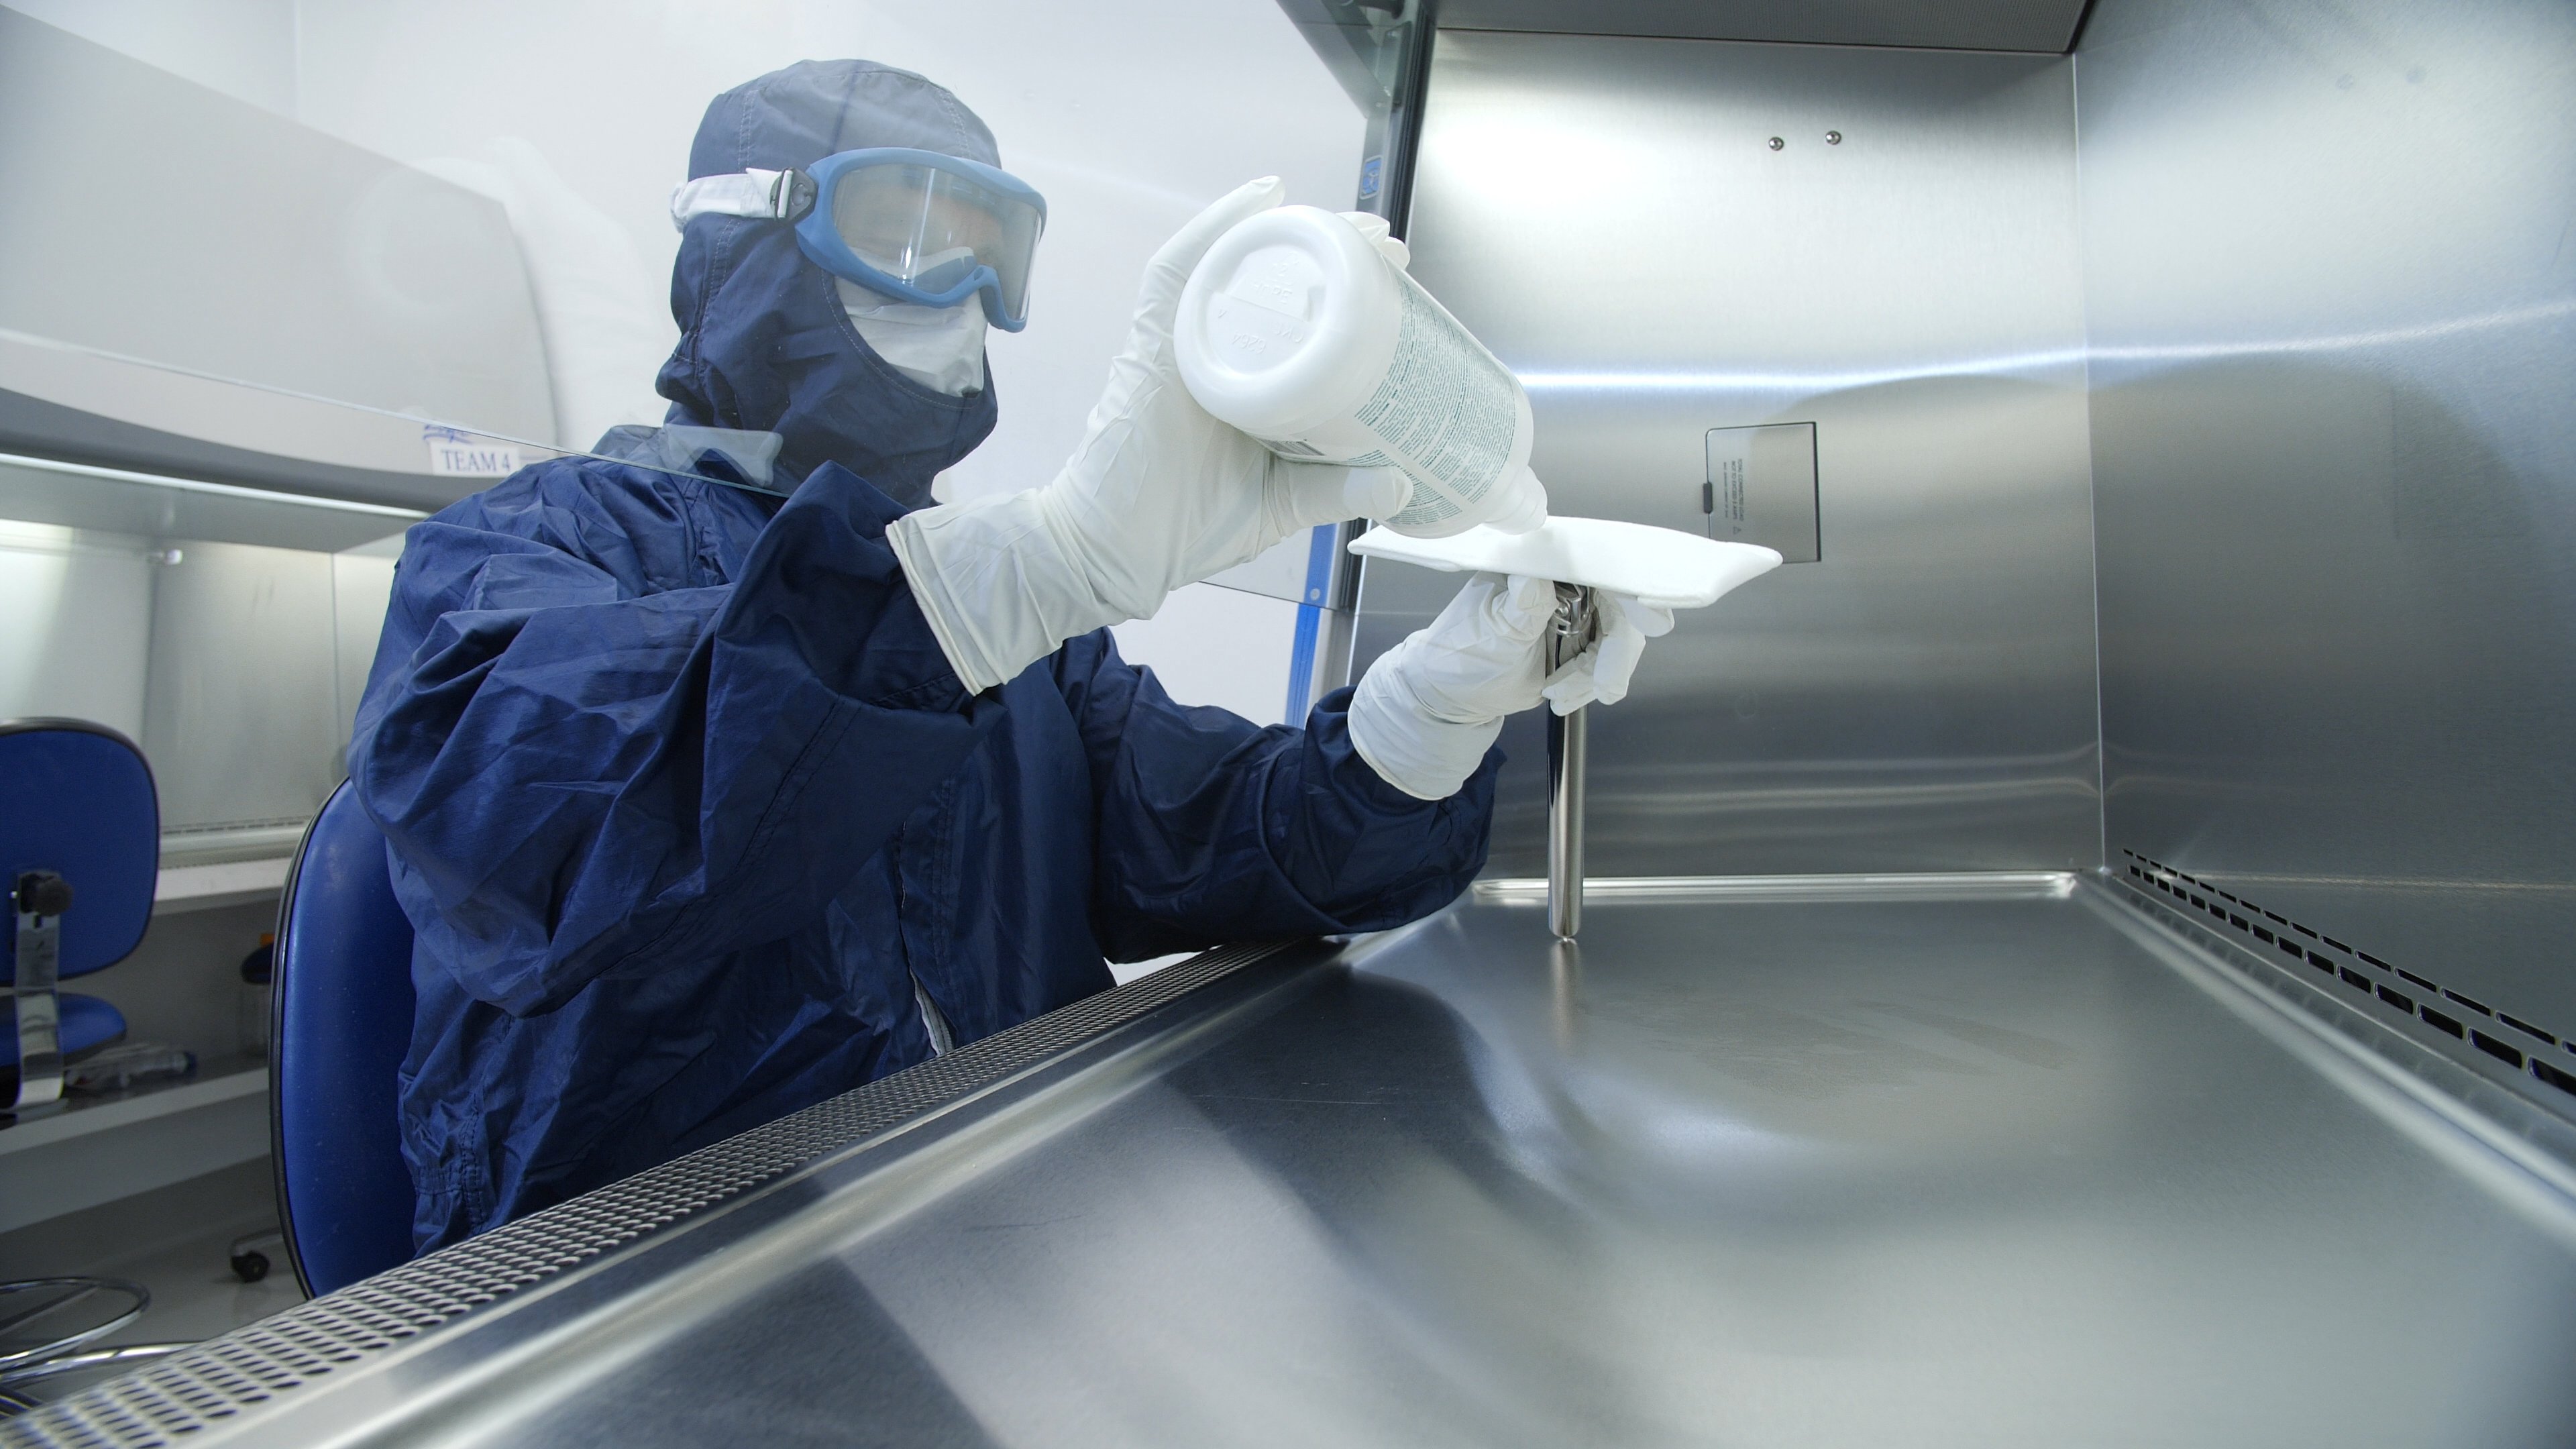 cleanroom worker applying disinfectant to easy reach tool